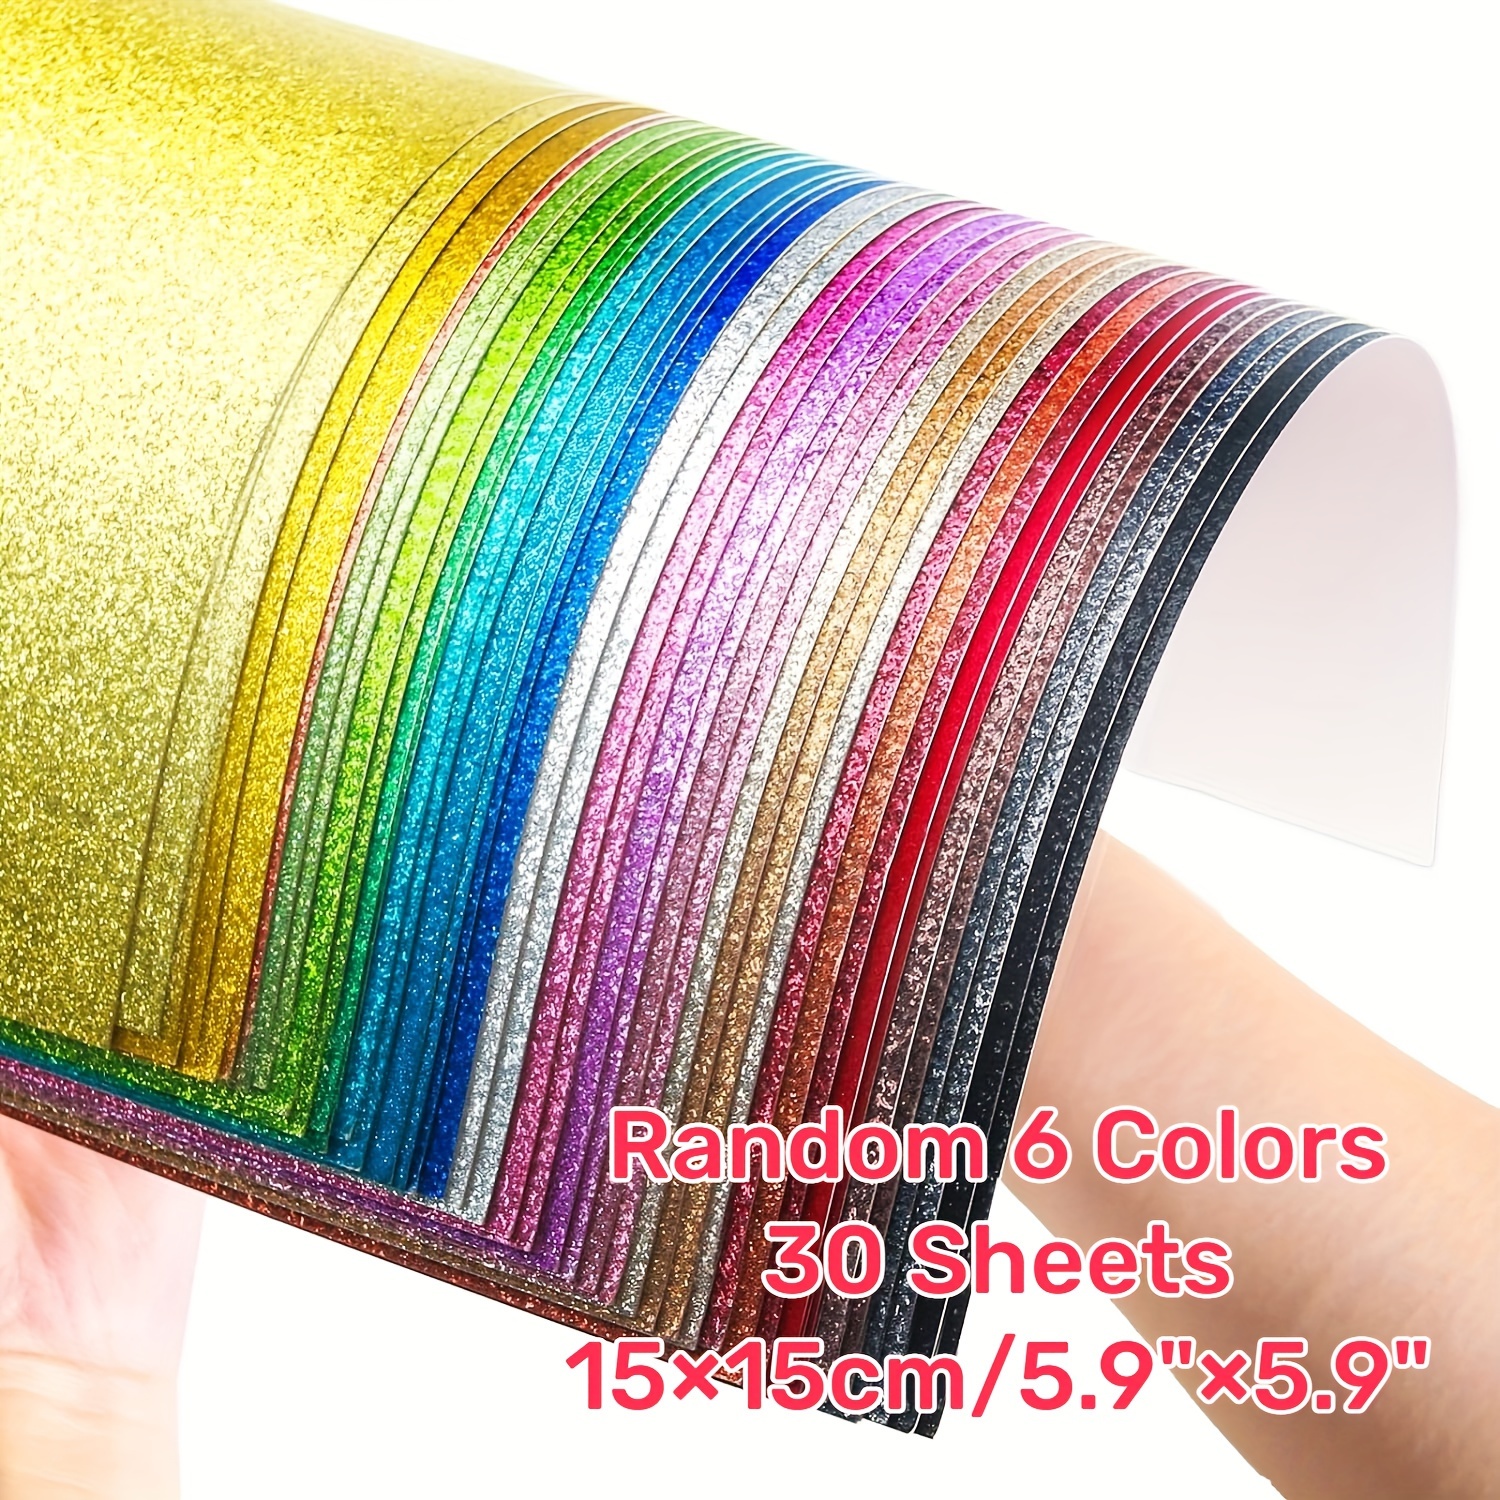 

30sheets Square Colorful Glitter Cardstock Paper 15cm*15cm Sparkling Cardstock For Creating Holiday Greeting Card, Cake Toppers, Wedding Crafts, Paper Crafting, 250gsm